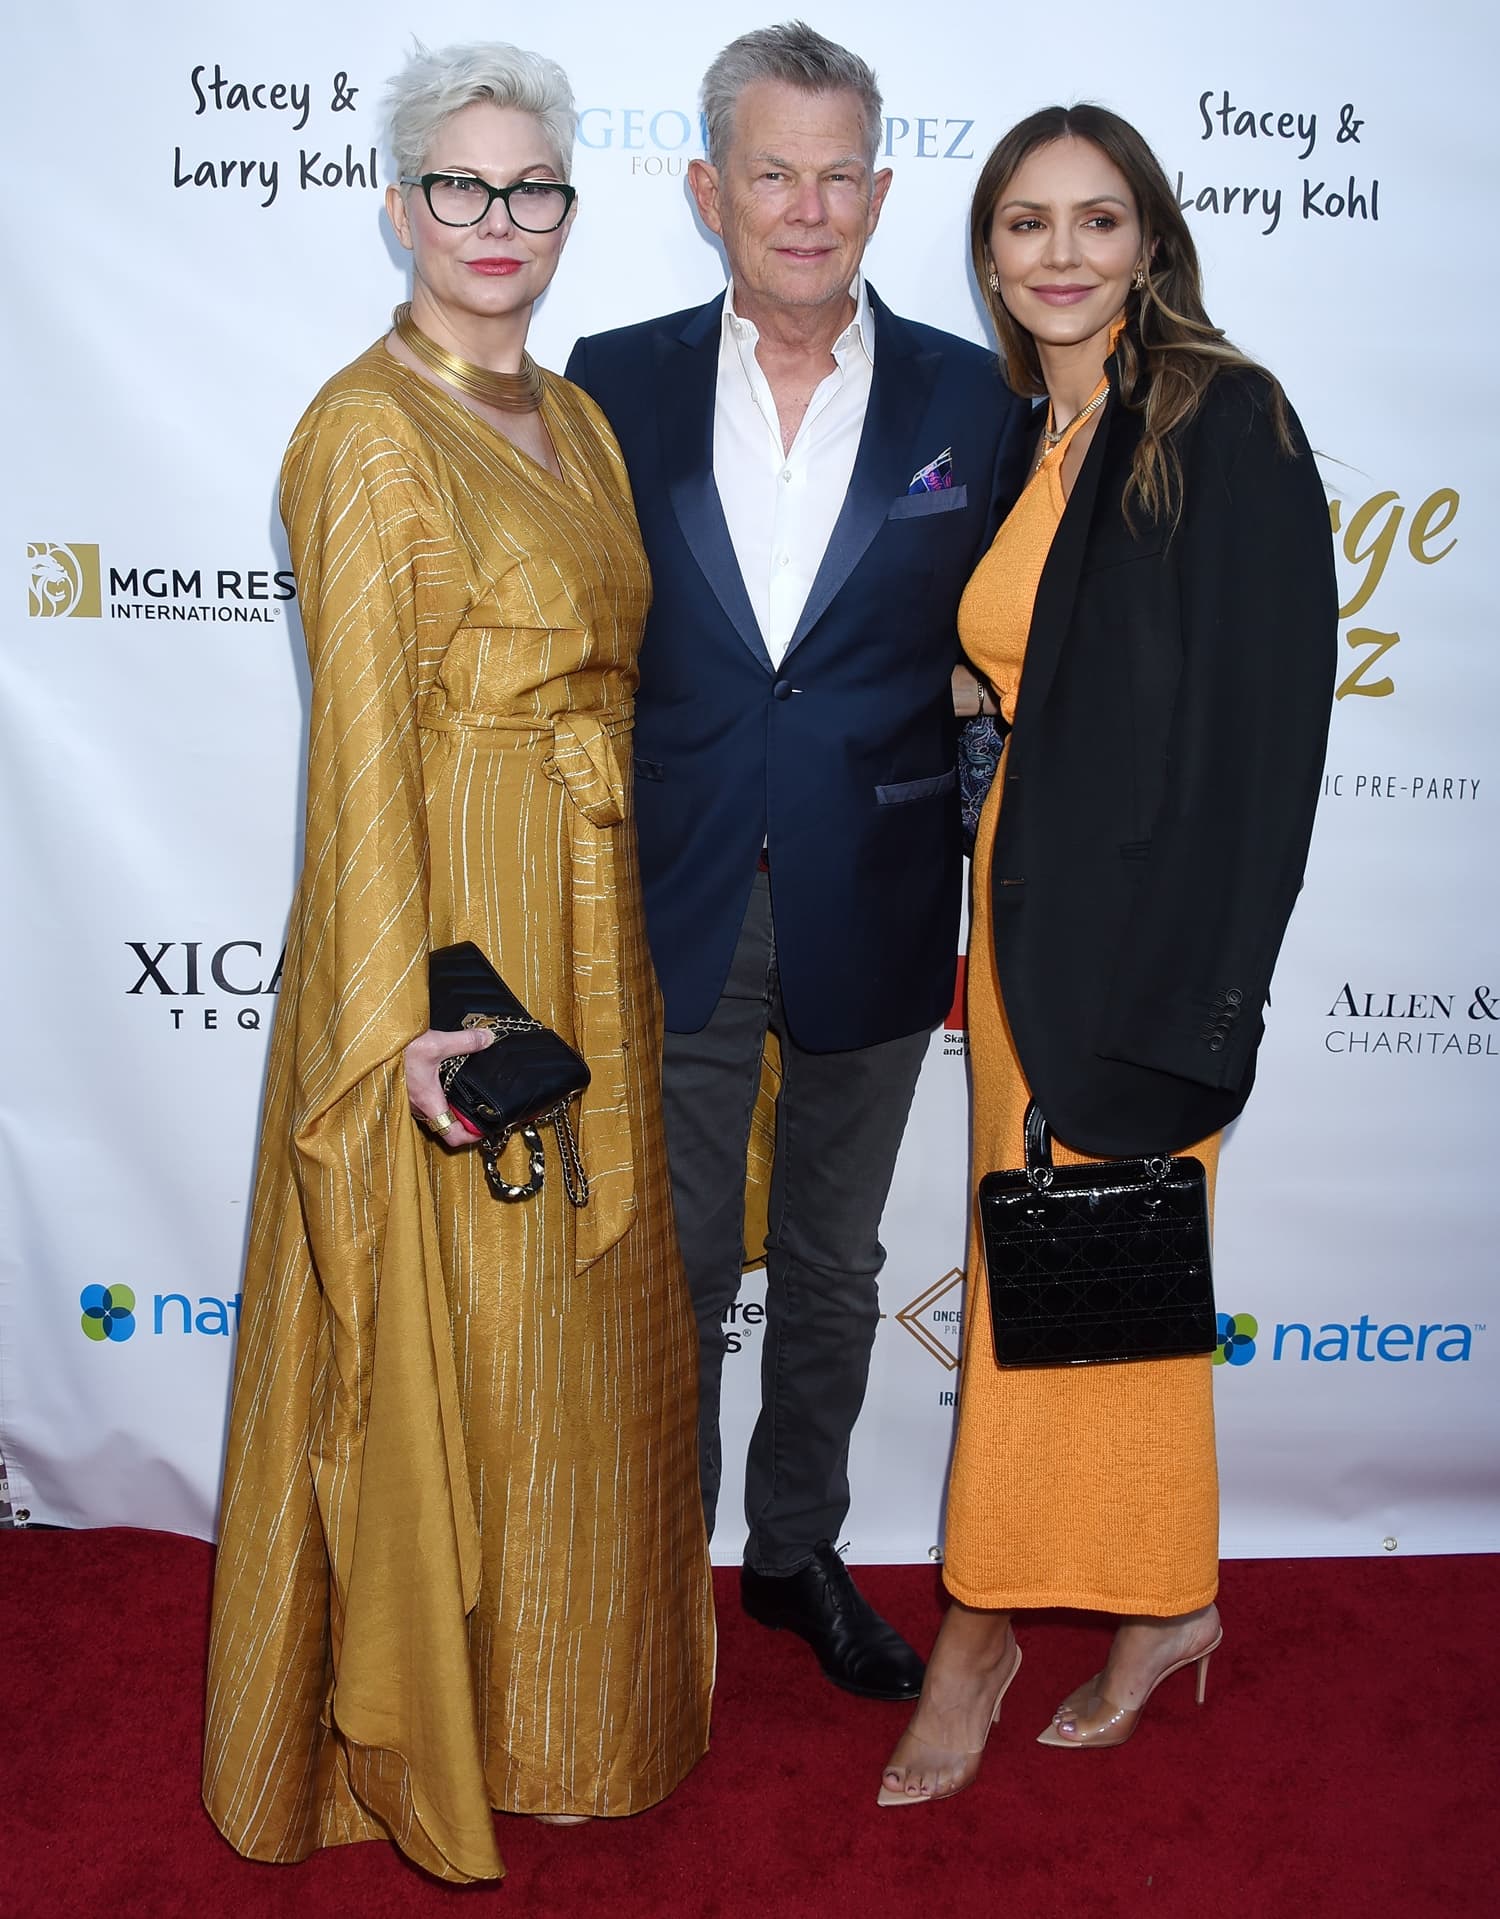 Amy S. Foster (L), David Foster, and his wife Katharine McPhee